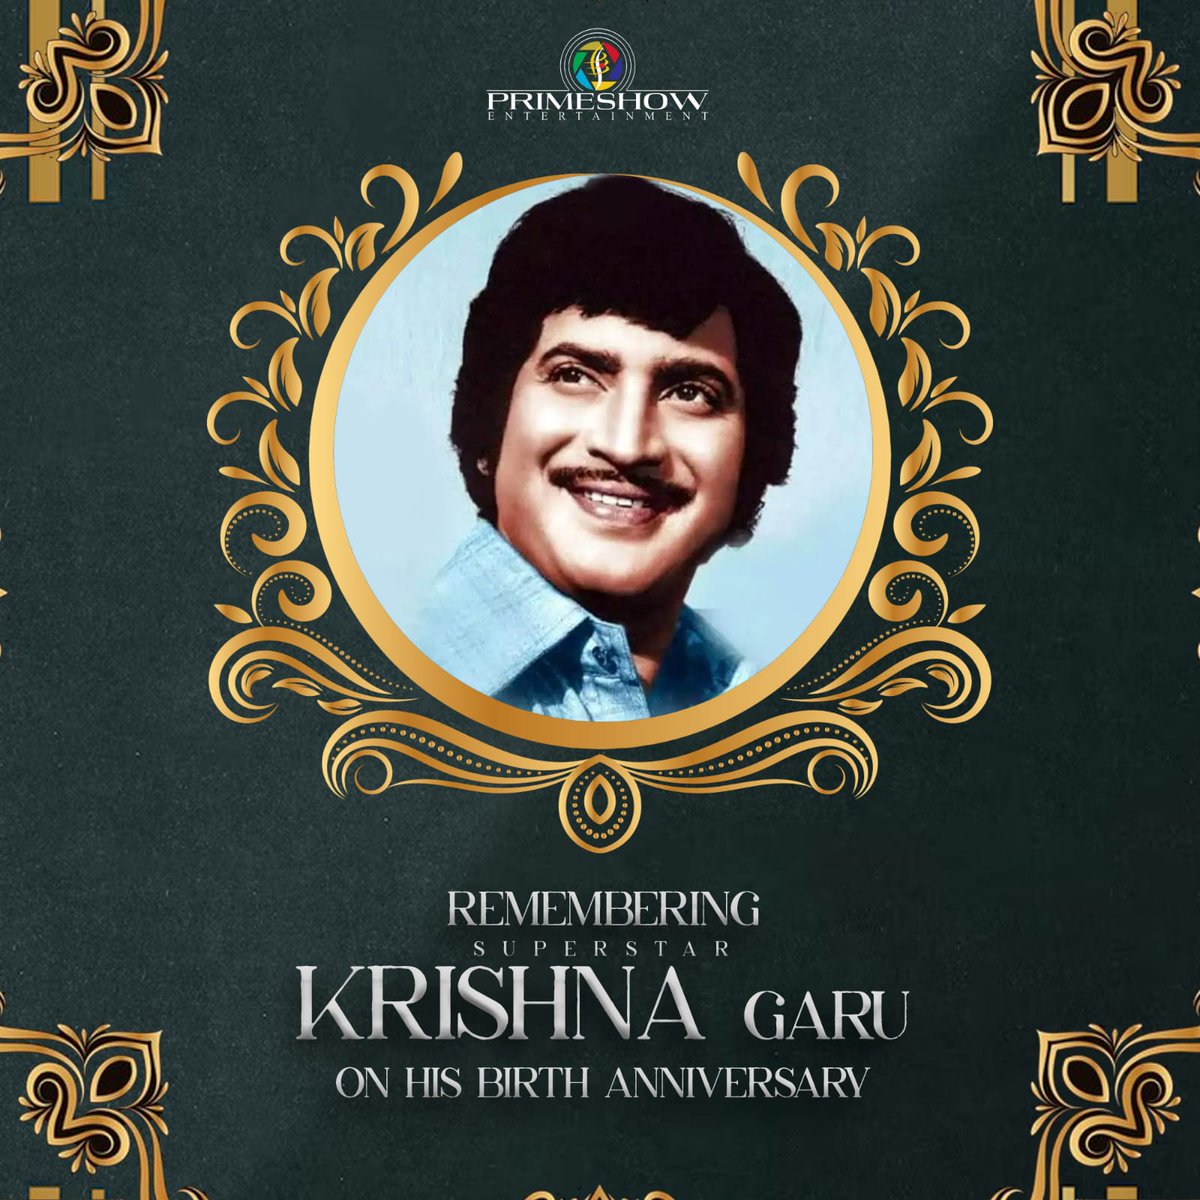 Honoring the birth anniversary of the great #Krishna Garu. A true superstar whose legacy continues to shine brightly in the hearts of his fans and in the history of cinema. 🙏❤️ #SSKLivesOn #SuperstarKrishna